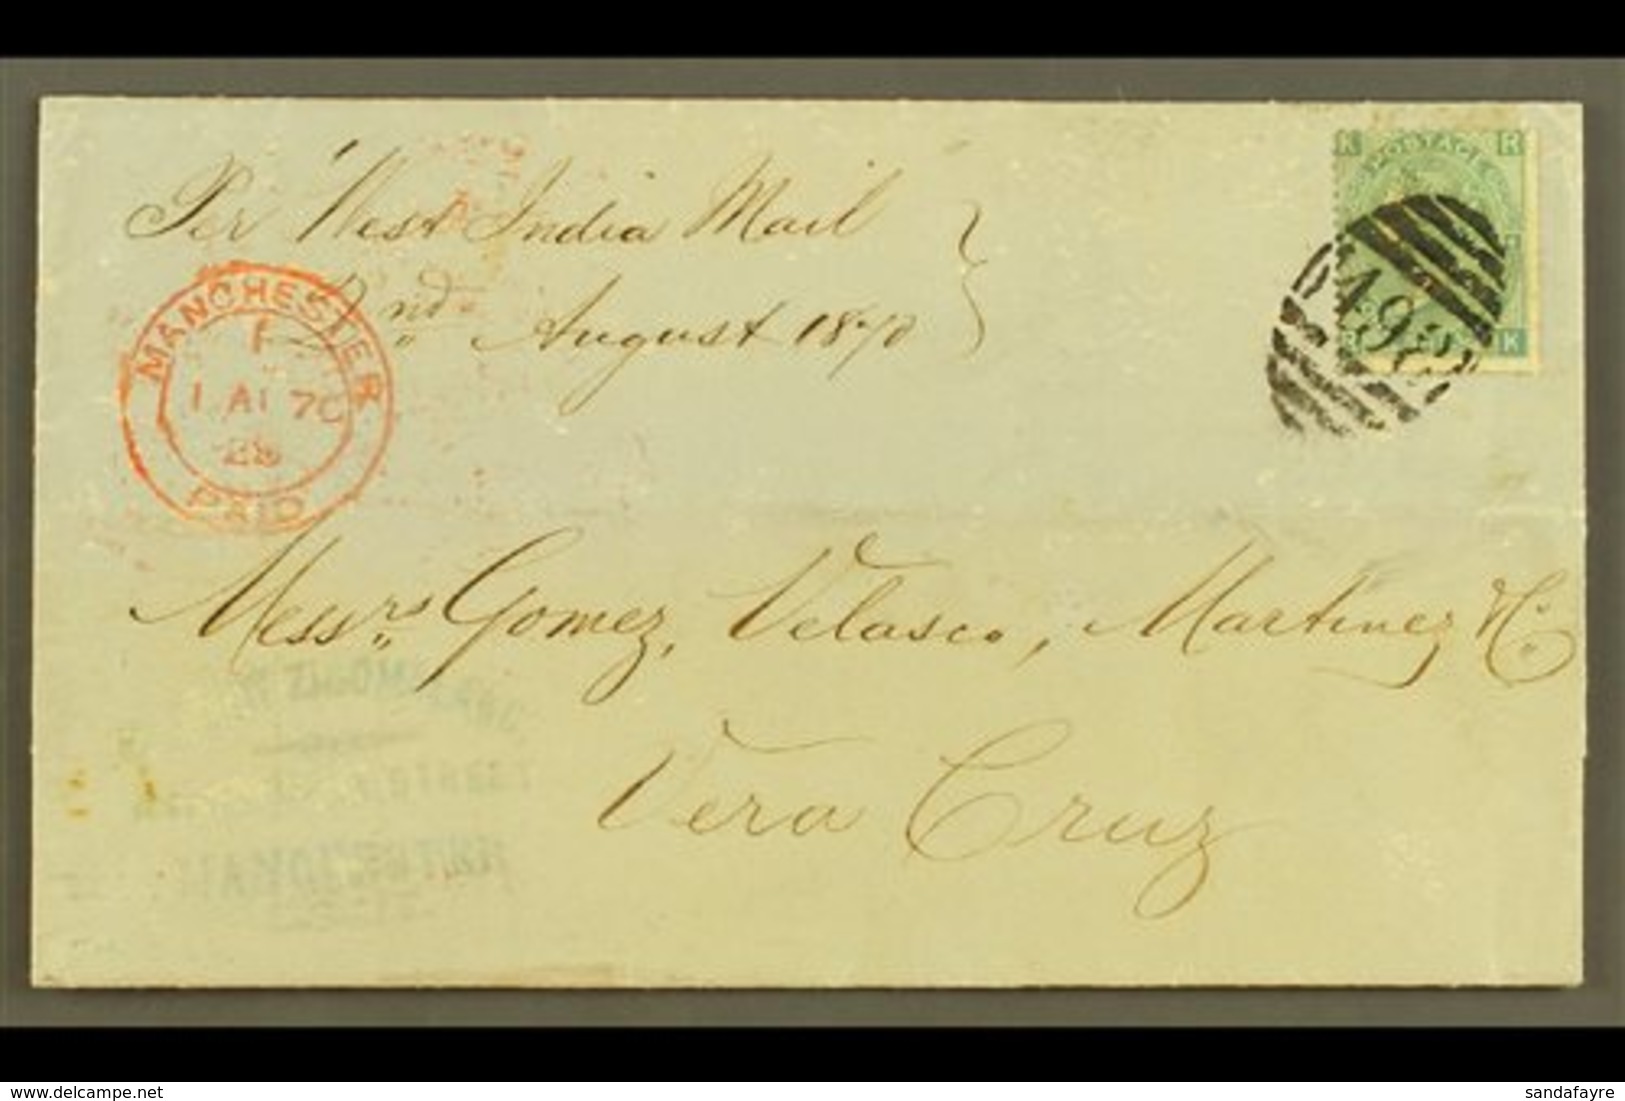 1870 (1 Aug) LS From Manchester, England To Vera Cruz Bearing GB 1s Green (SG117) Tied "498" Pmk, Various British Transi - Mexique